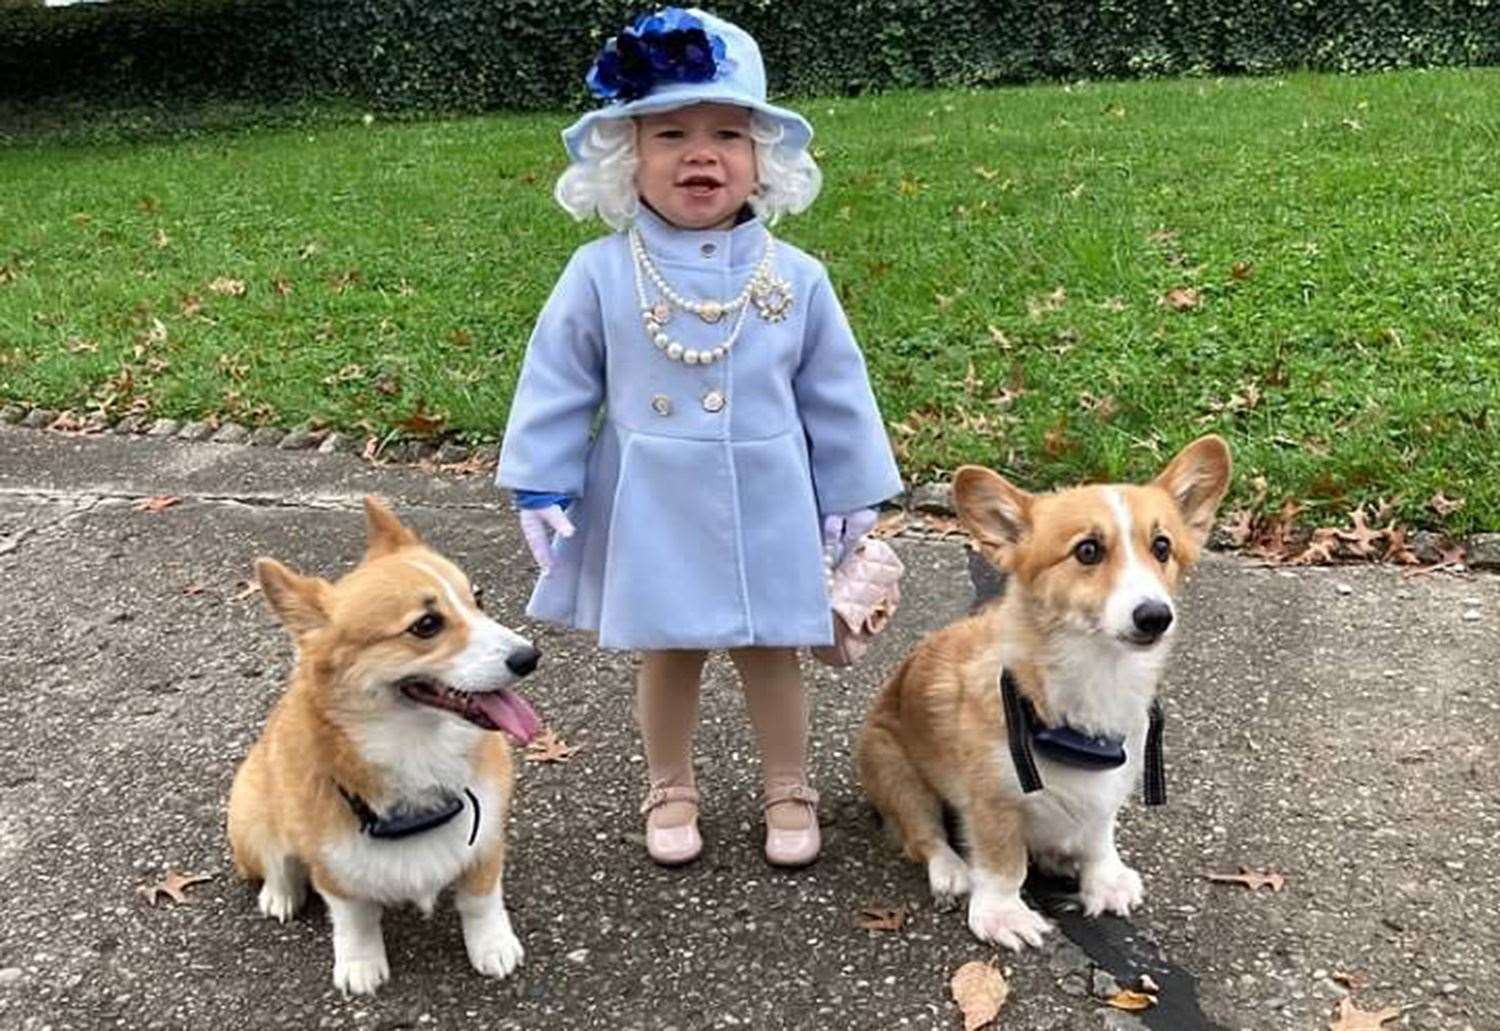 Toddler Jalayne Sutherland posing alongside her pet corgis at home in Ohio, USA last year - her family sent Her Majesty a picture and received an official letter of thanks in return. Picture: Katelyn Sutherland/BPM Media